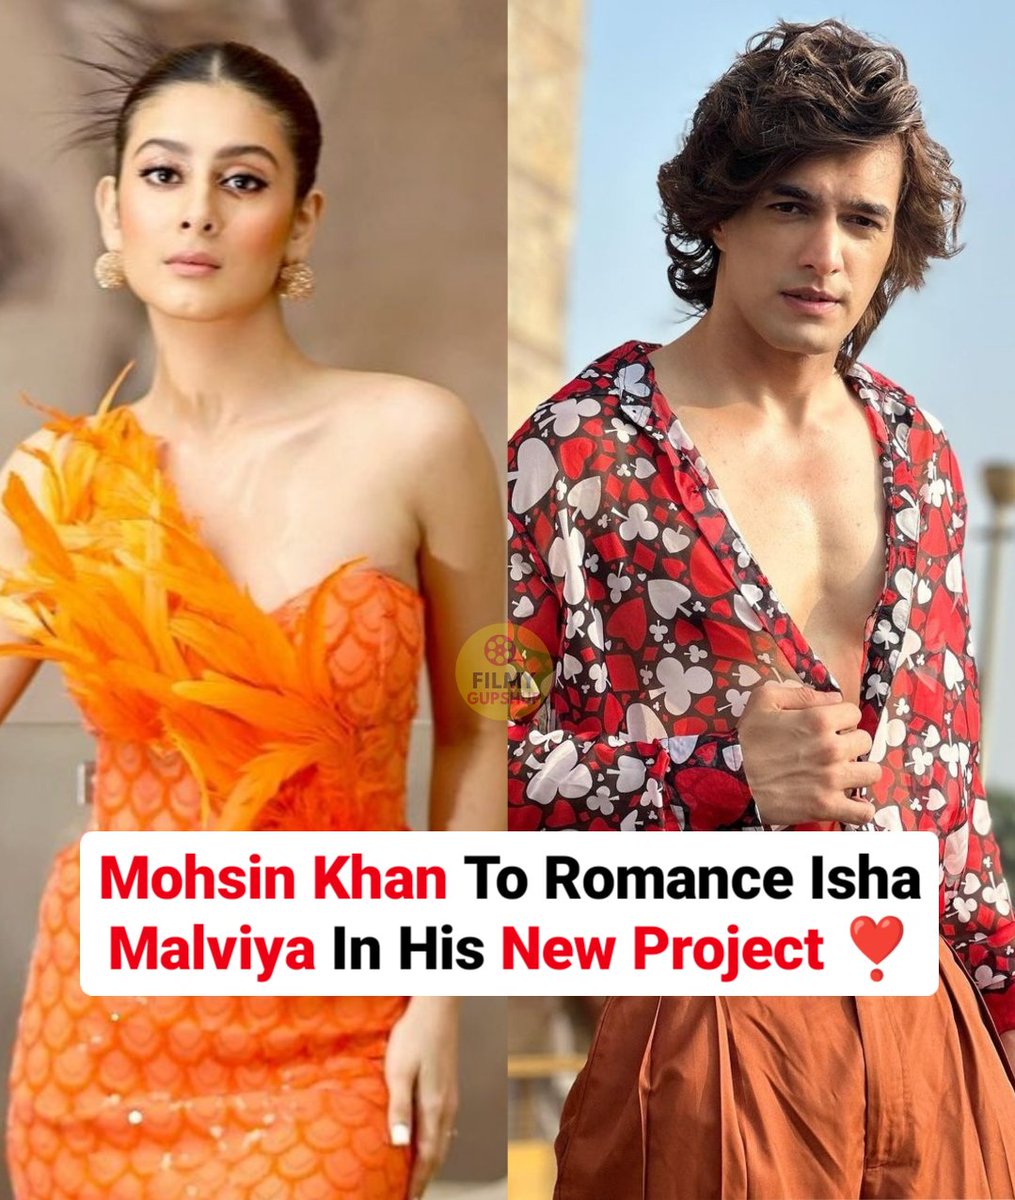 As per reports, Isha Malviya & Mohsin Khan are currently in Chandigarh & shooting for their upcoming music video which will be sung by Stebin Ben.

Are you excited for this pairing??

Follow @FilmyGupshups for more!

#MohsinKhan #IshaMalviya #StebinBen #MusicVideo #Filmygupshup